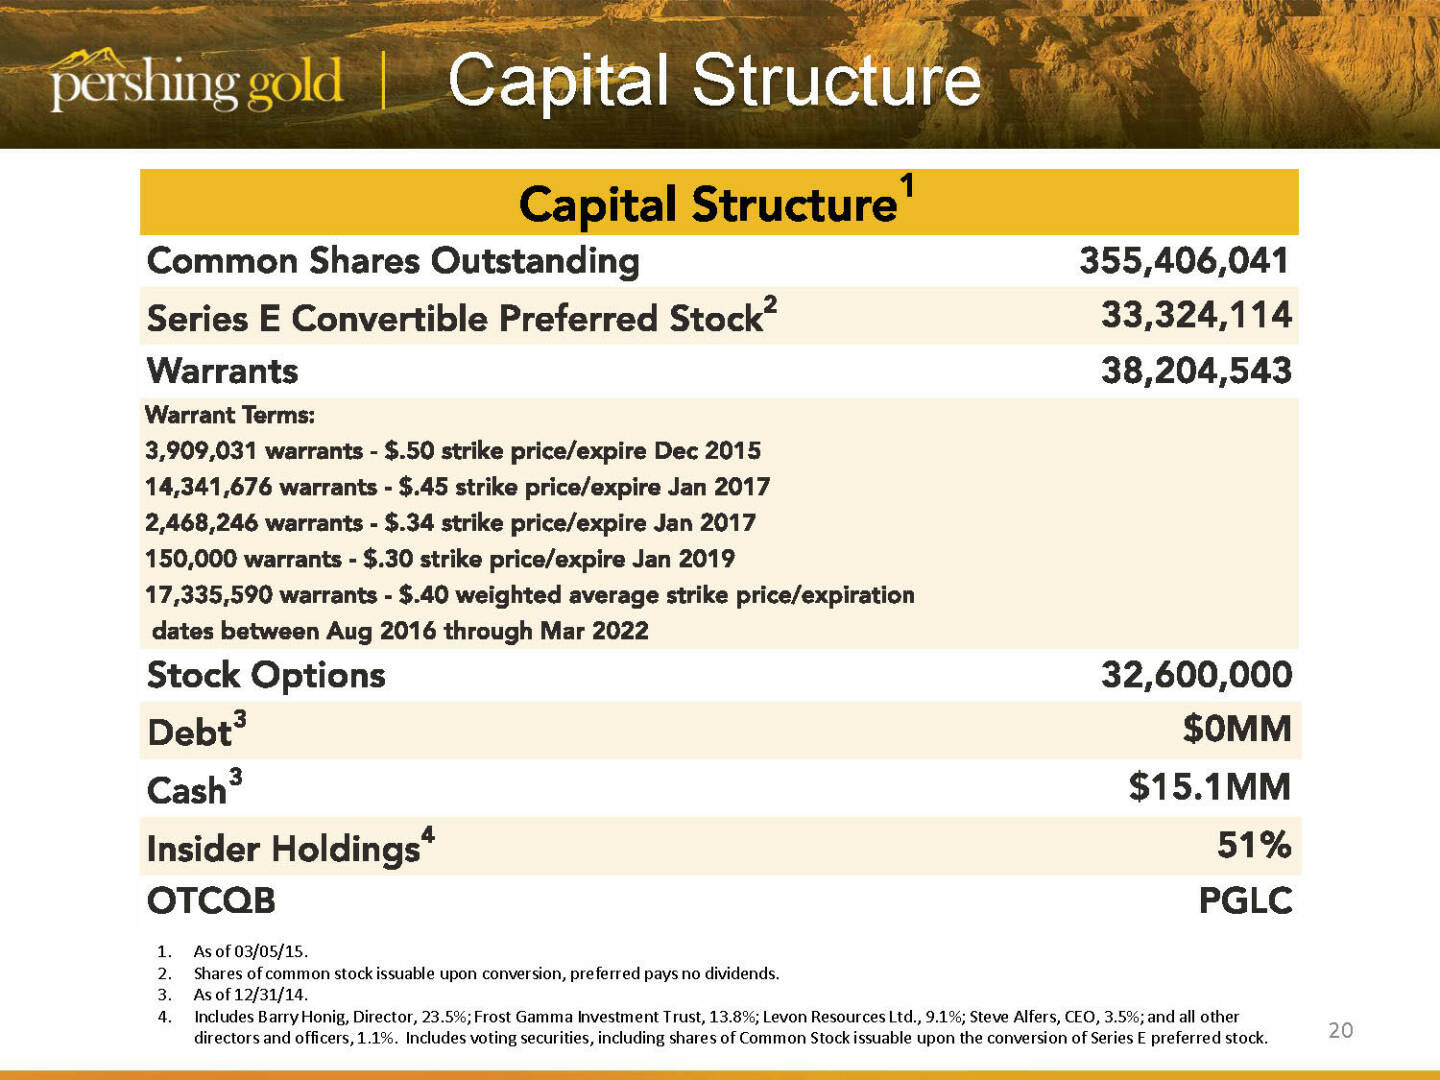 Capital Structure - Pershing Gold